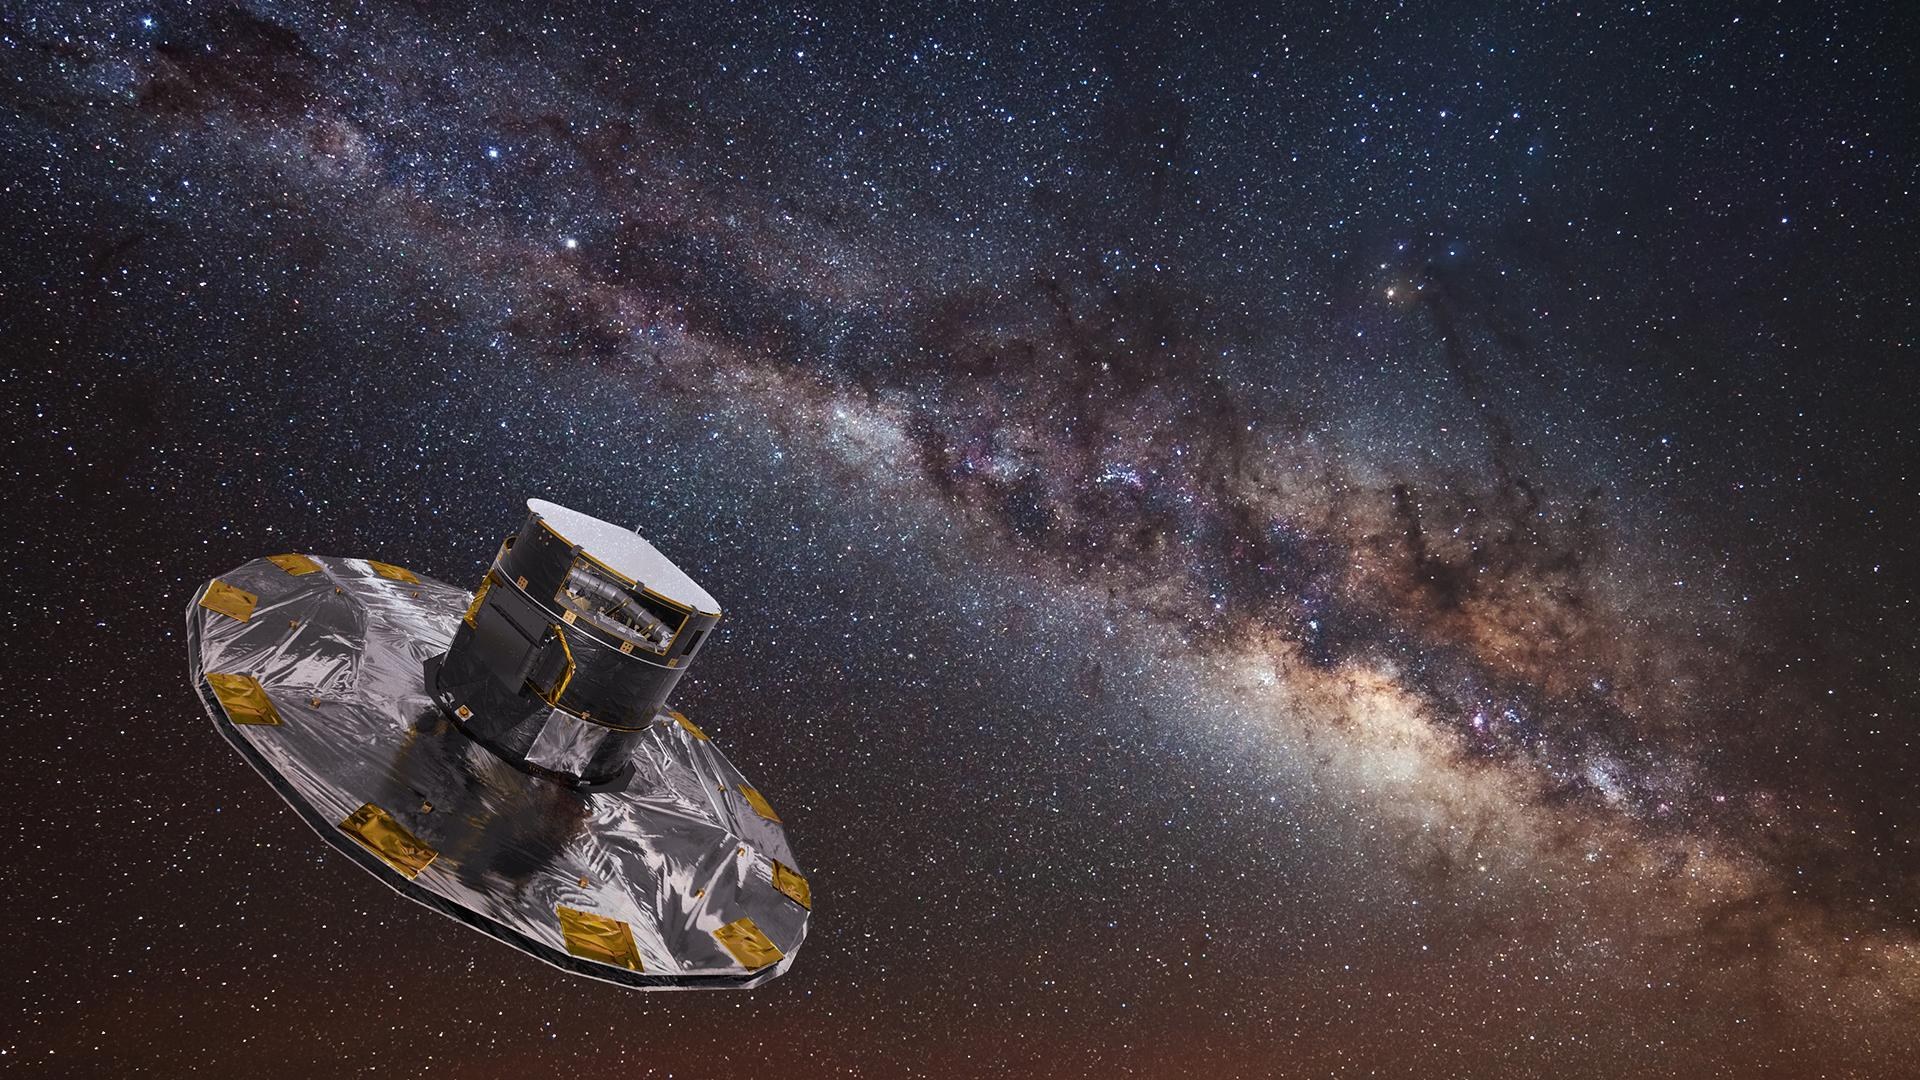 The Gaia observatory in space